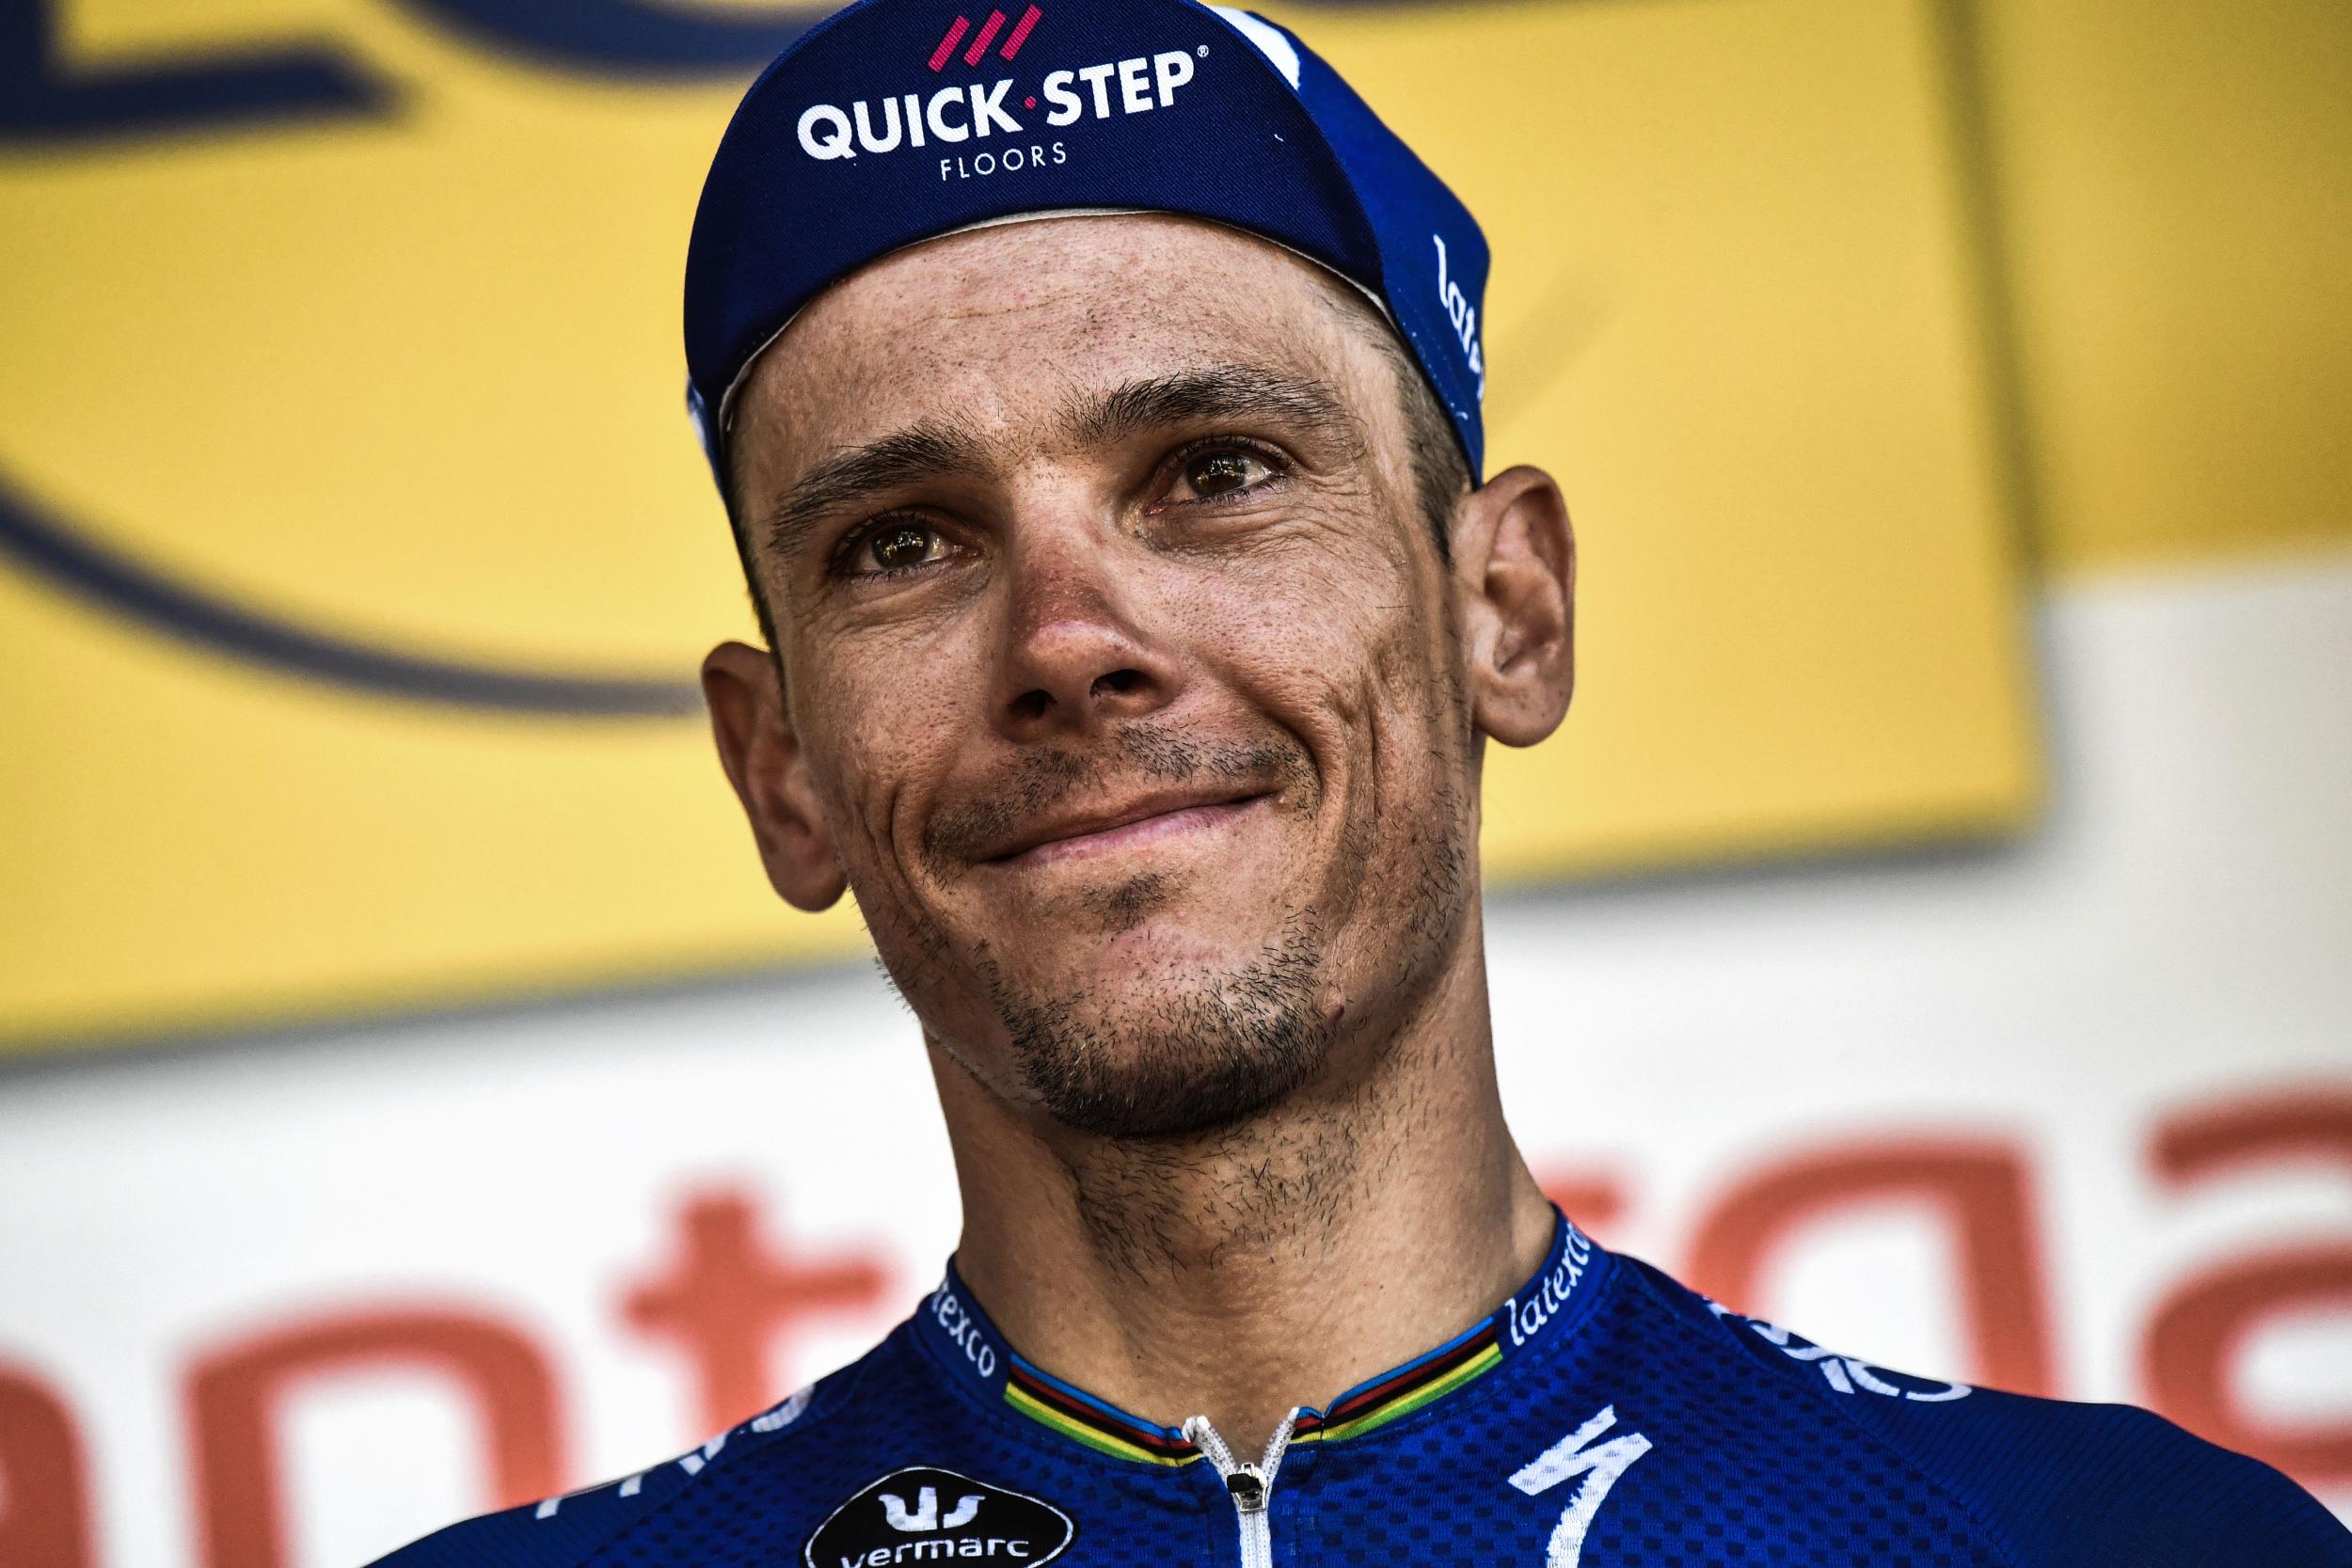 Philippe Gilbert collected the most combative rider award